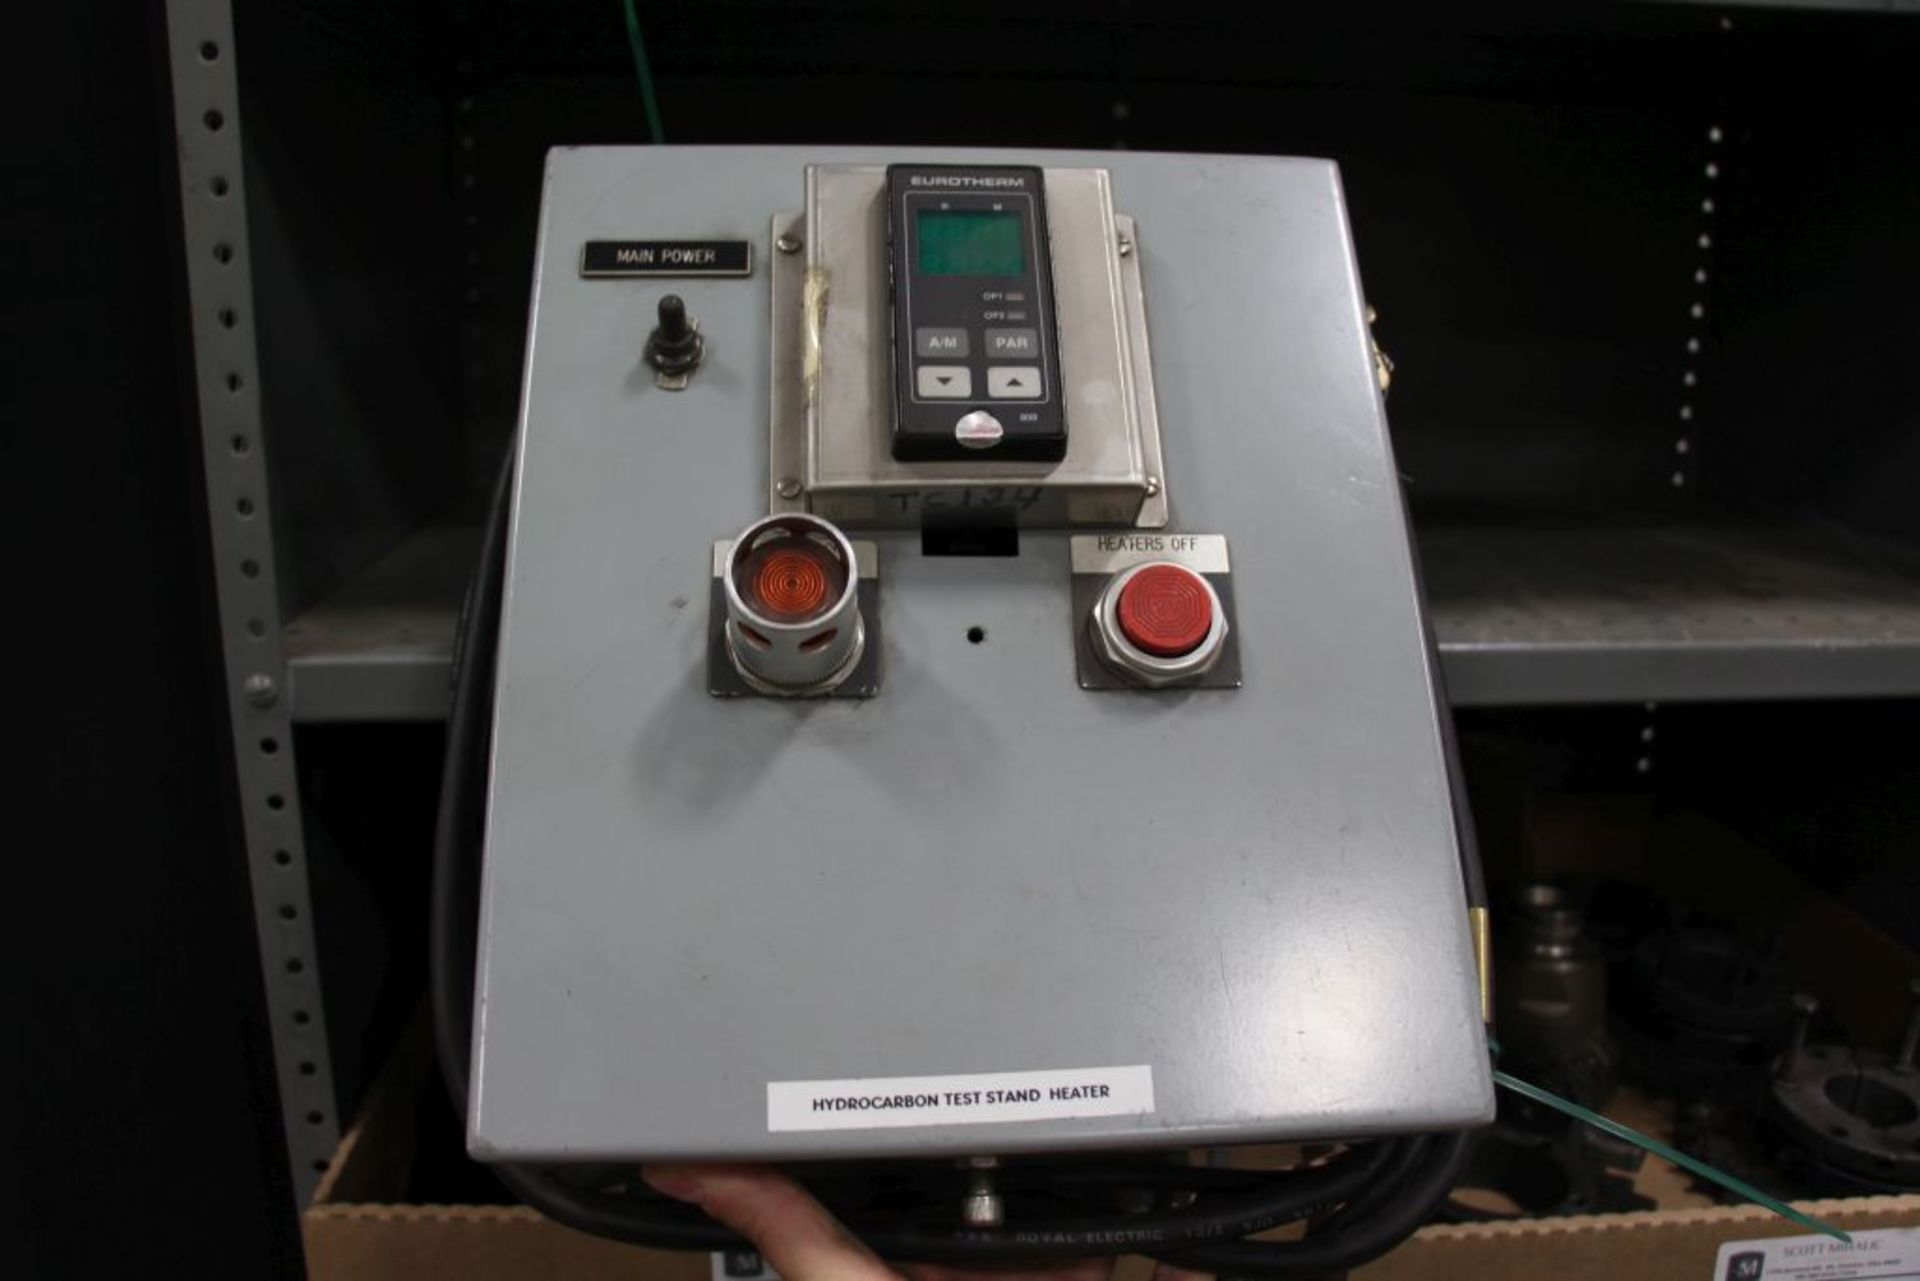 Control Box for Hydro Carbon test stand heater